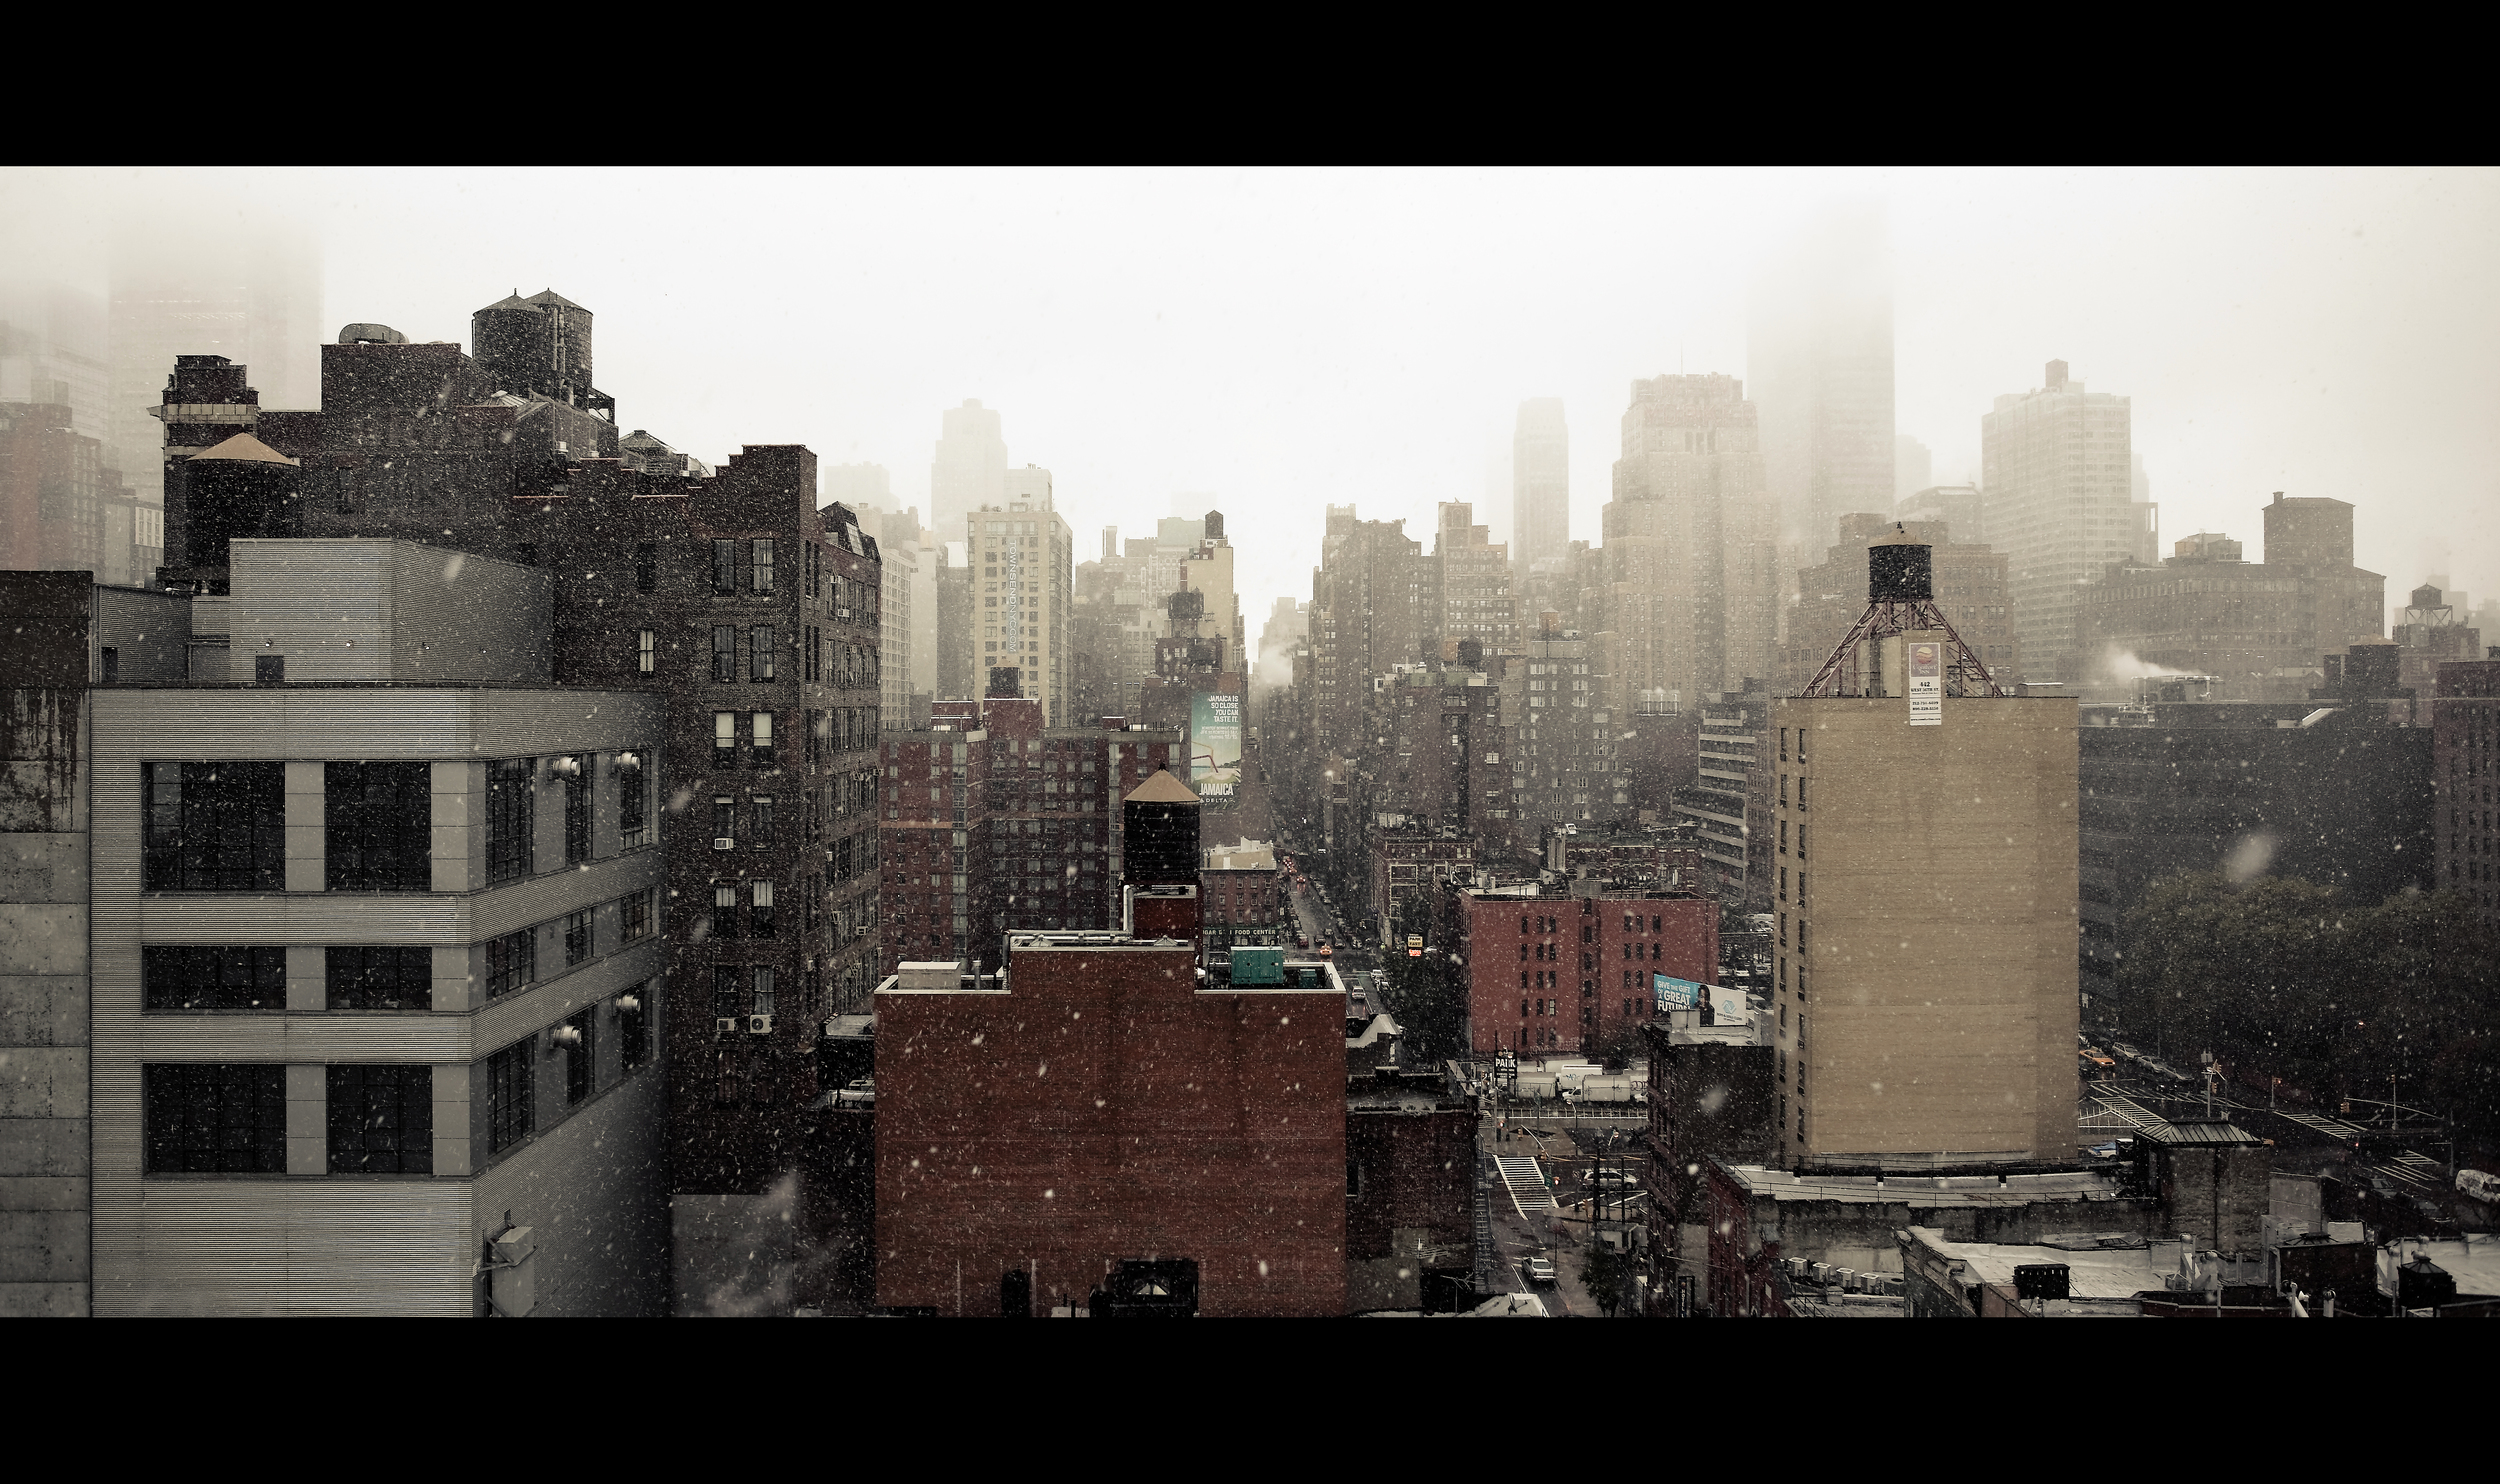 (Canon 5D Mark II + Zeiss Distagon T* 2/25 ZF.2) - One of my favorite things to take pictures of is bad weather, especially snow in the city!